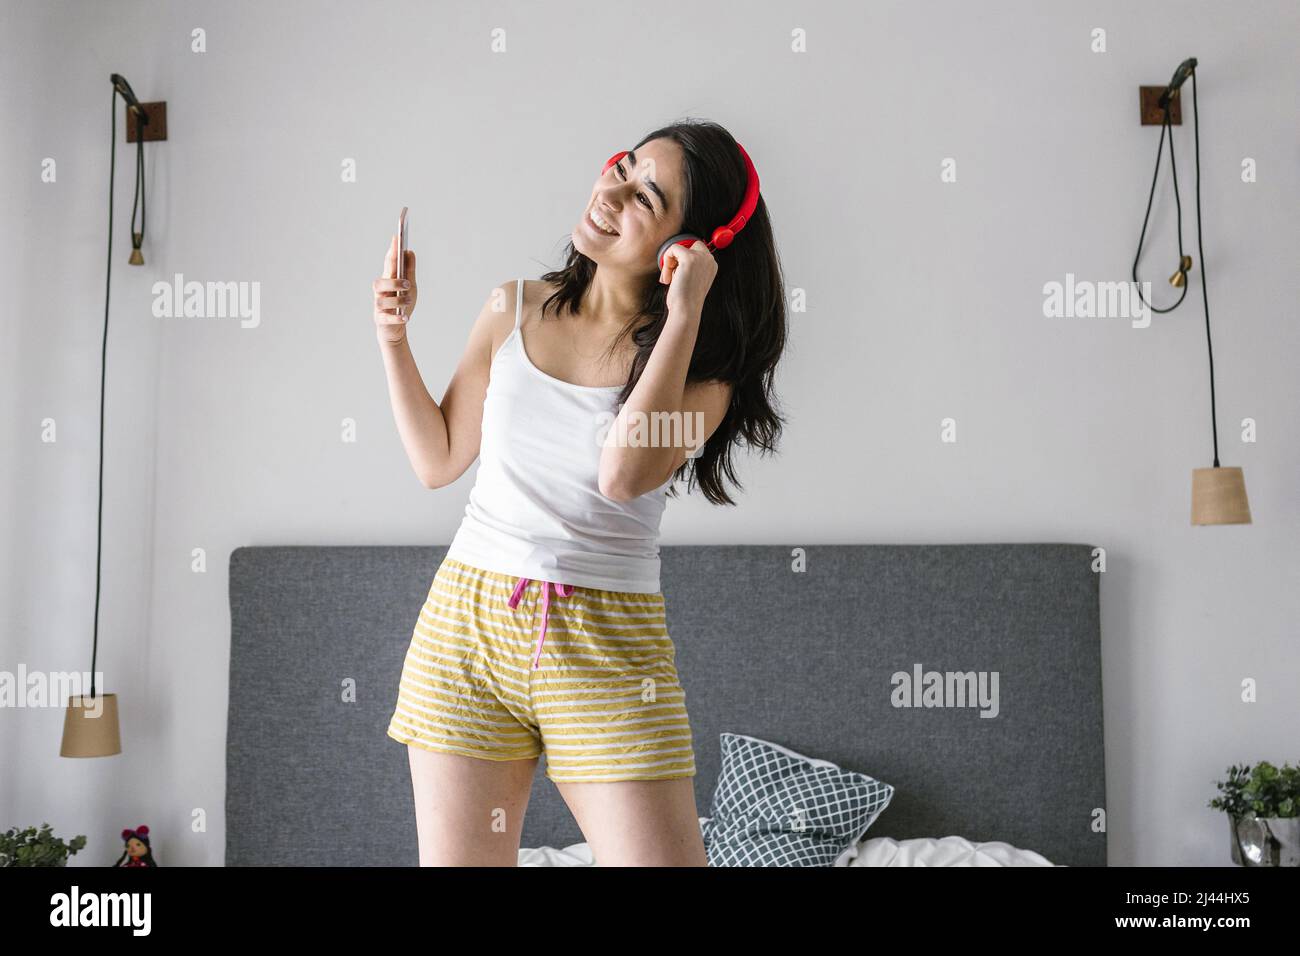 Young latin woman listening music with headphones on bed at home in Mexico Latin America Stock Photo